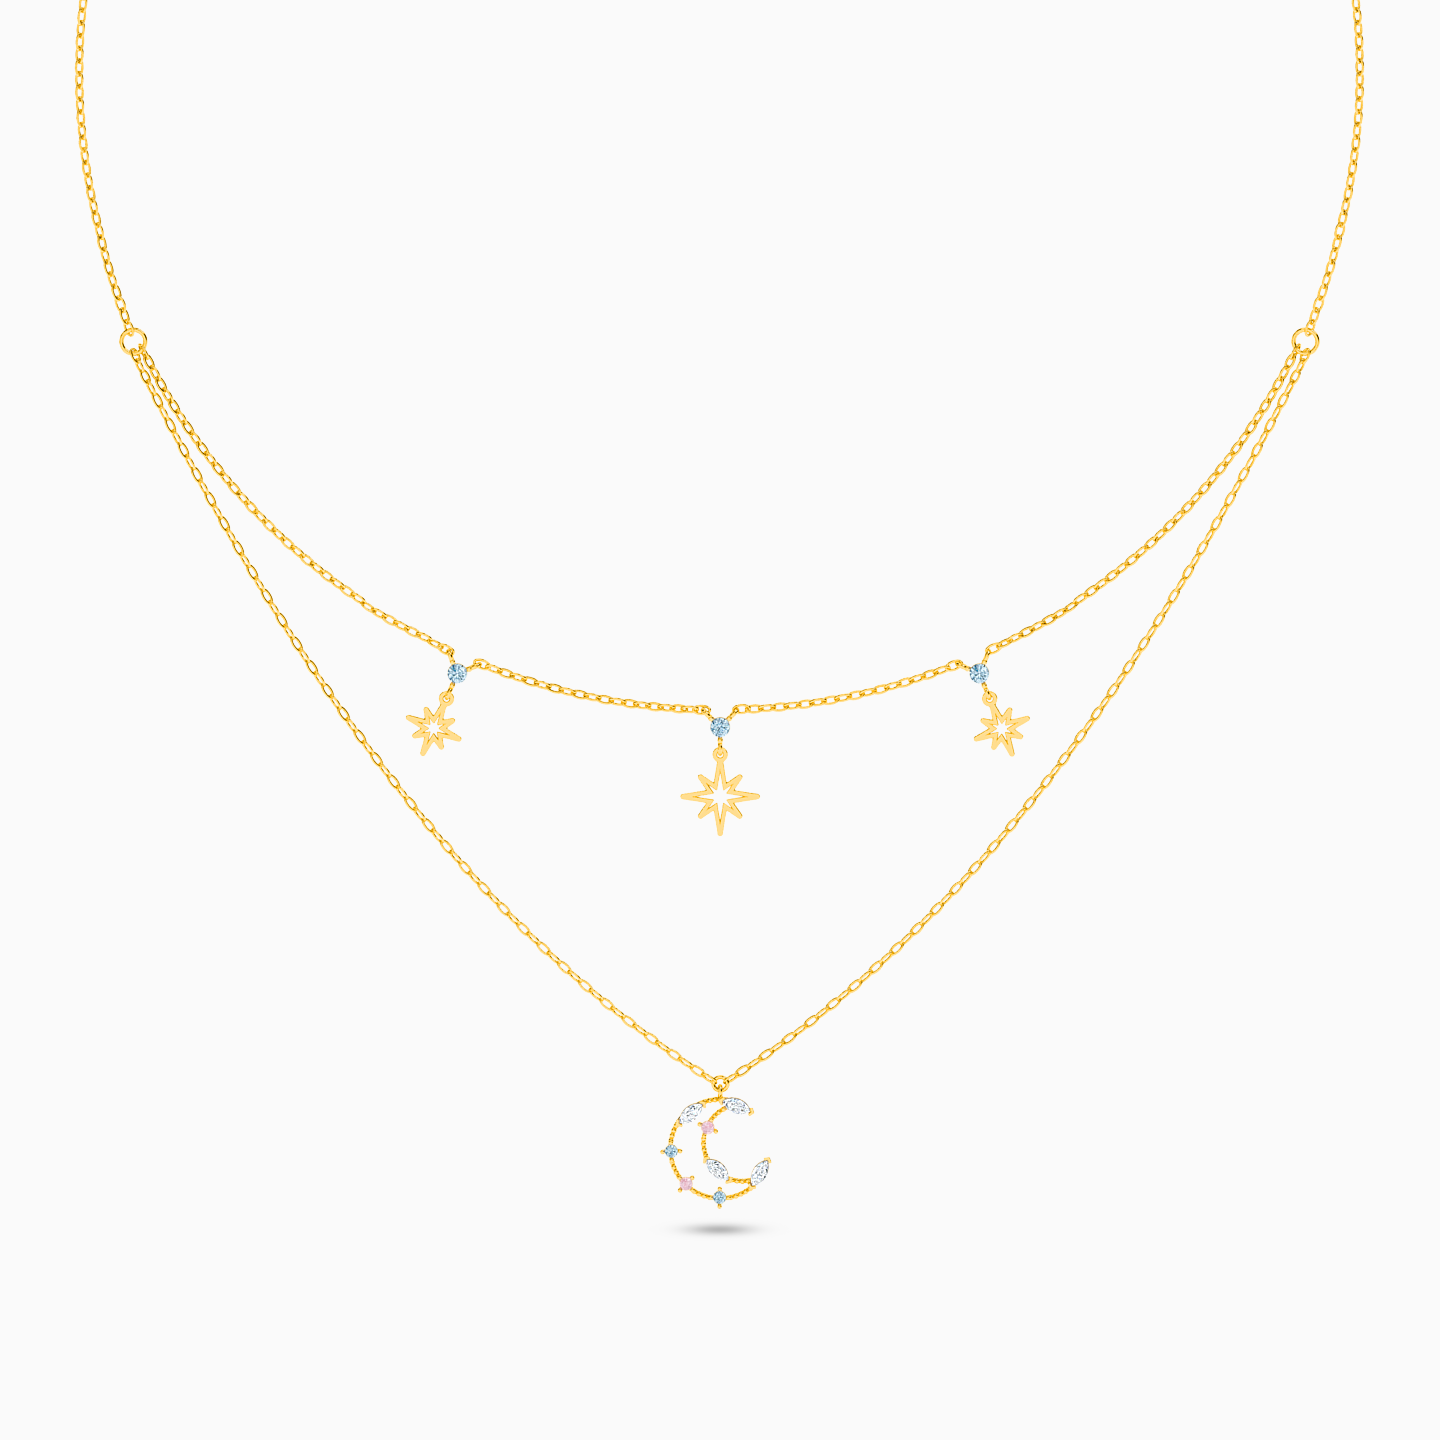 18K Gold Colored Stones Layered Necklace - 3